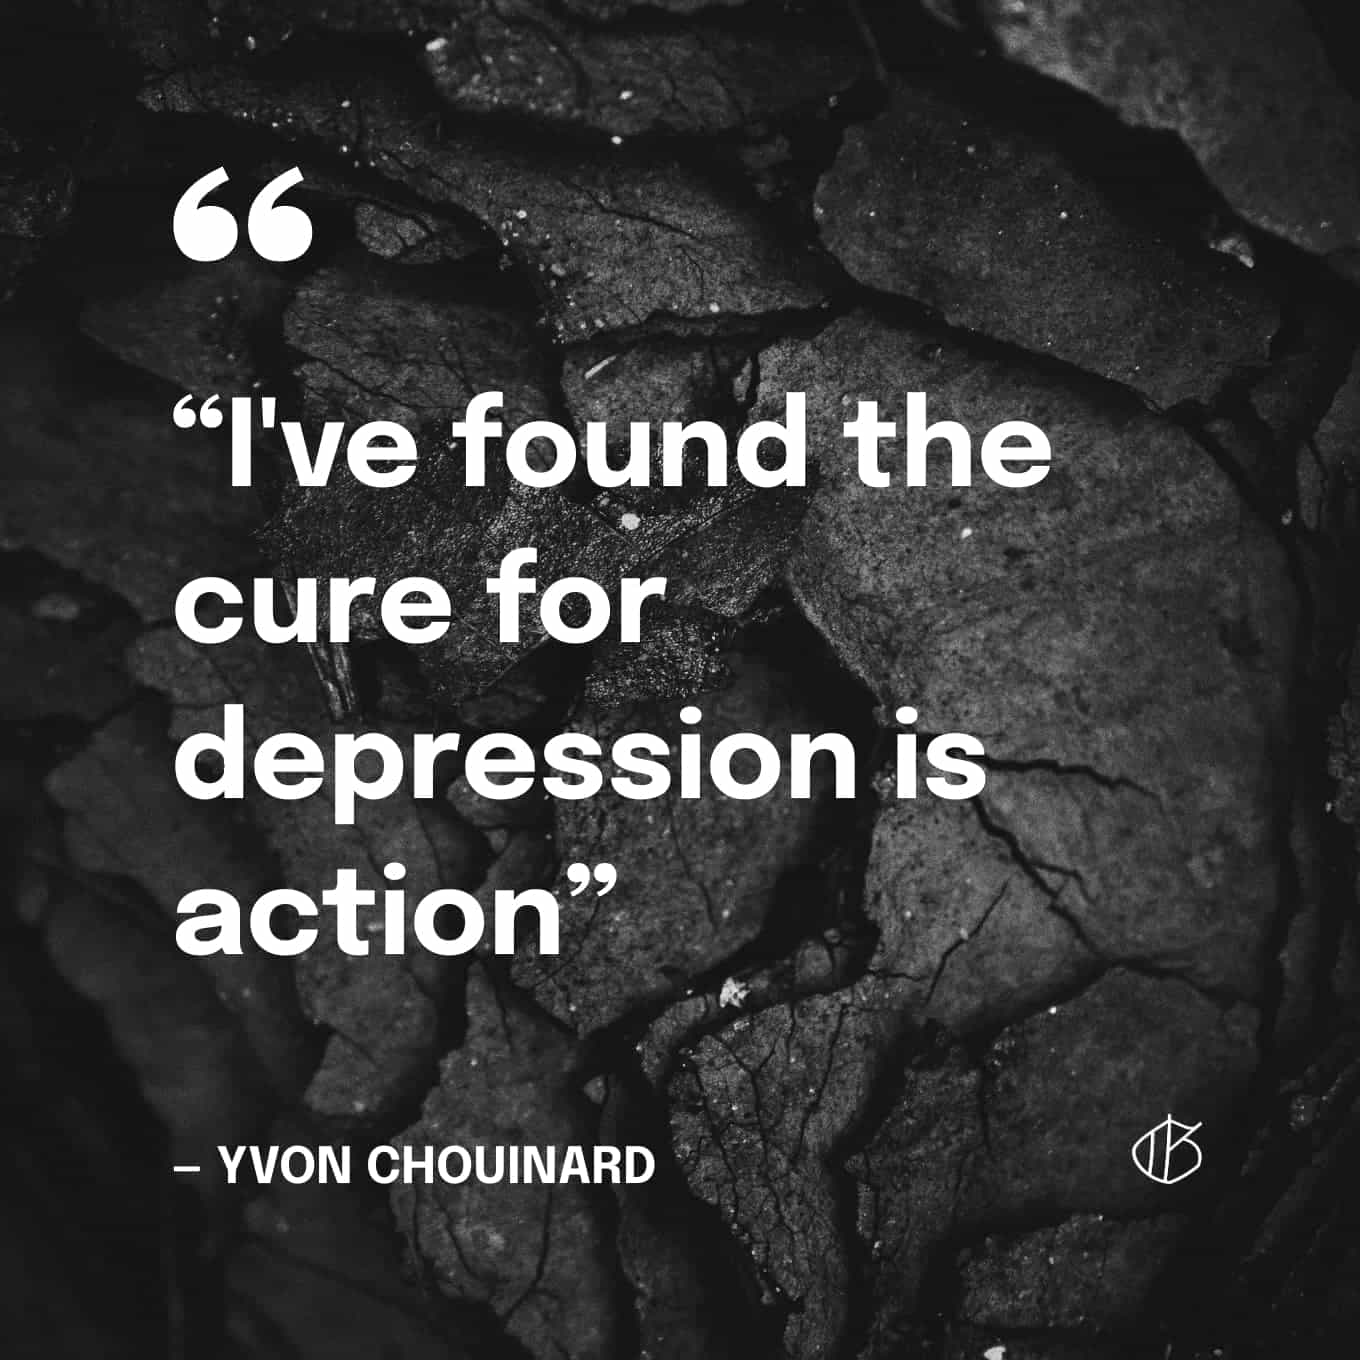 “I've found the cure for depression is action” — Yvon Chouinard